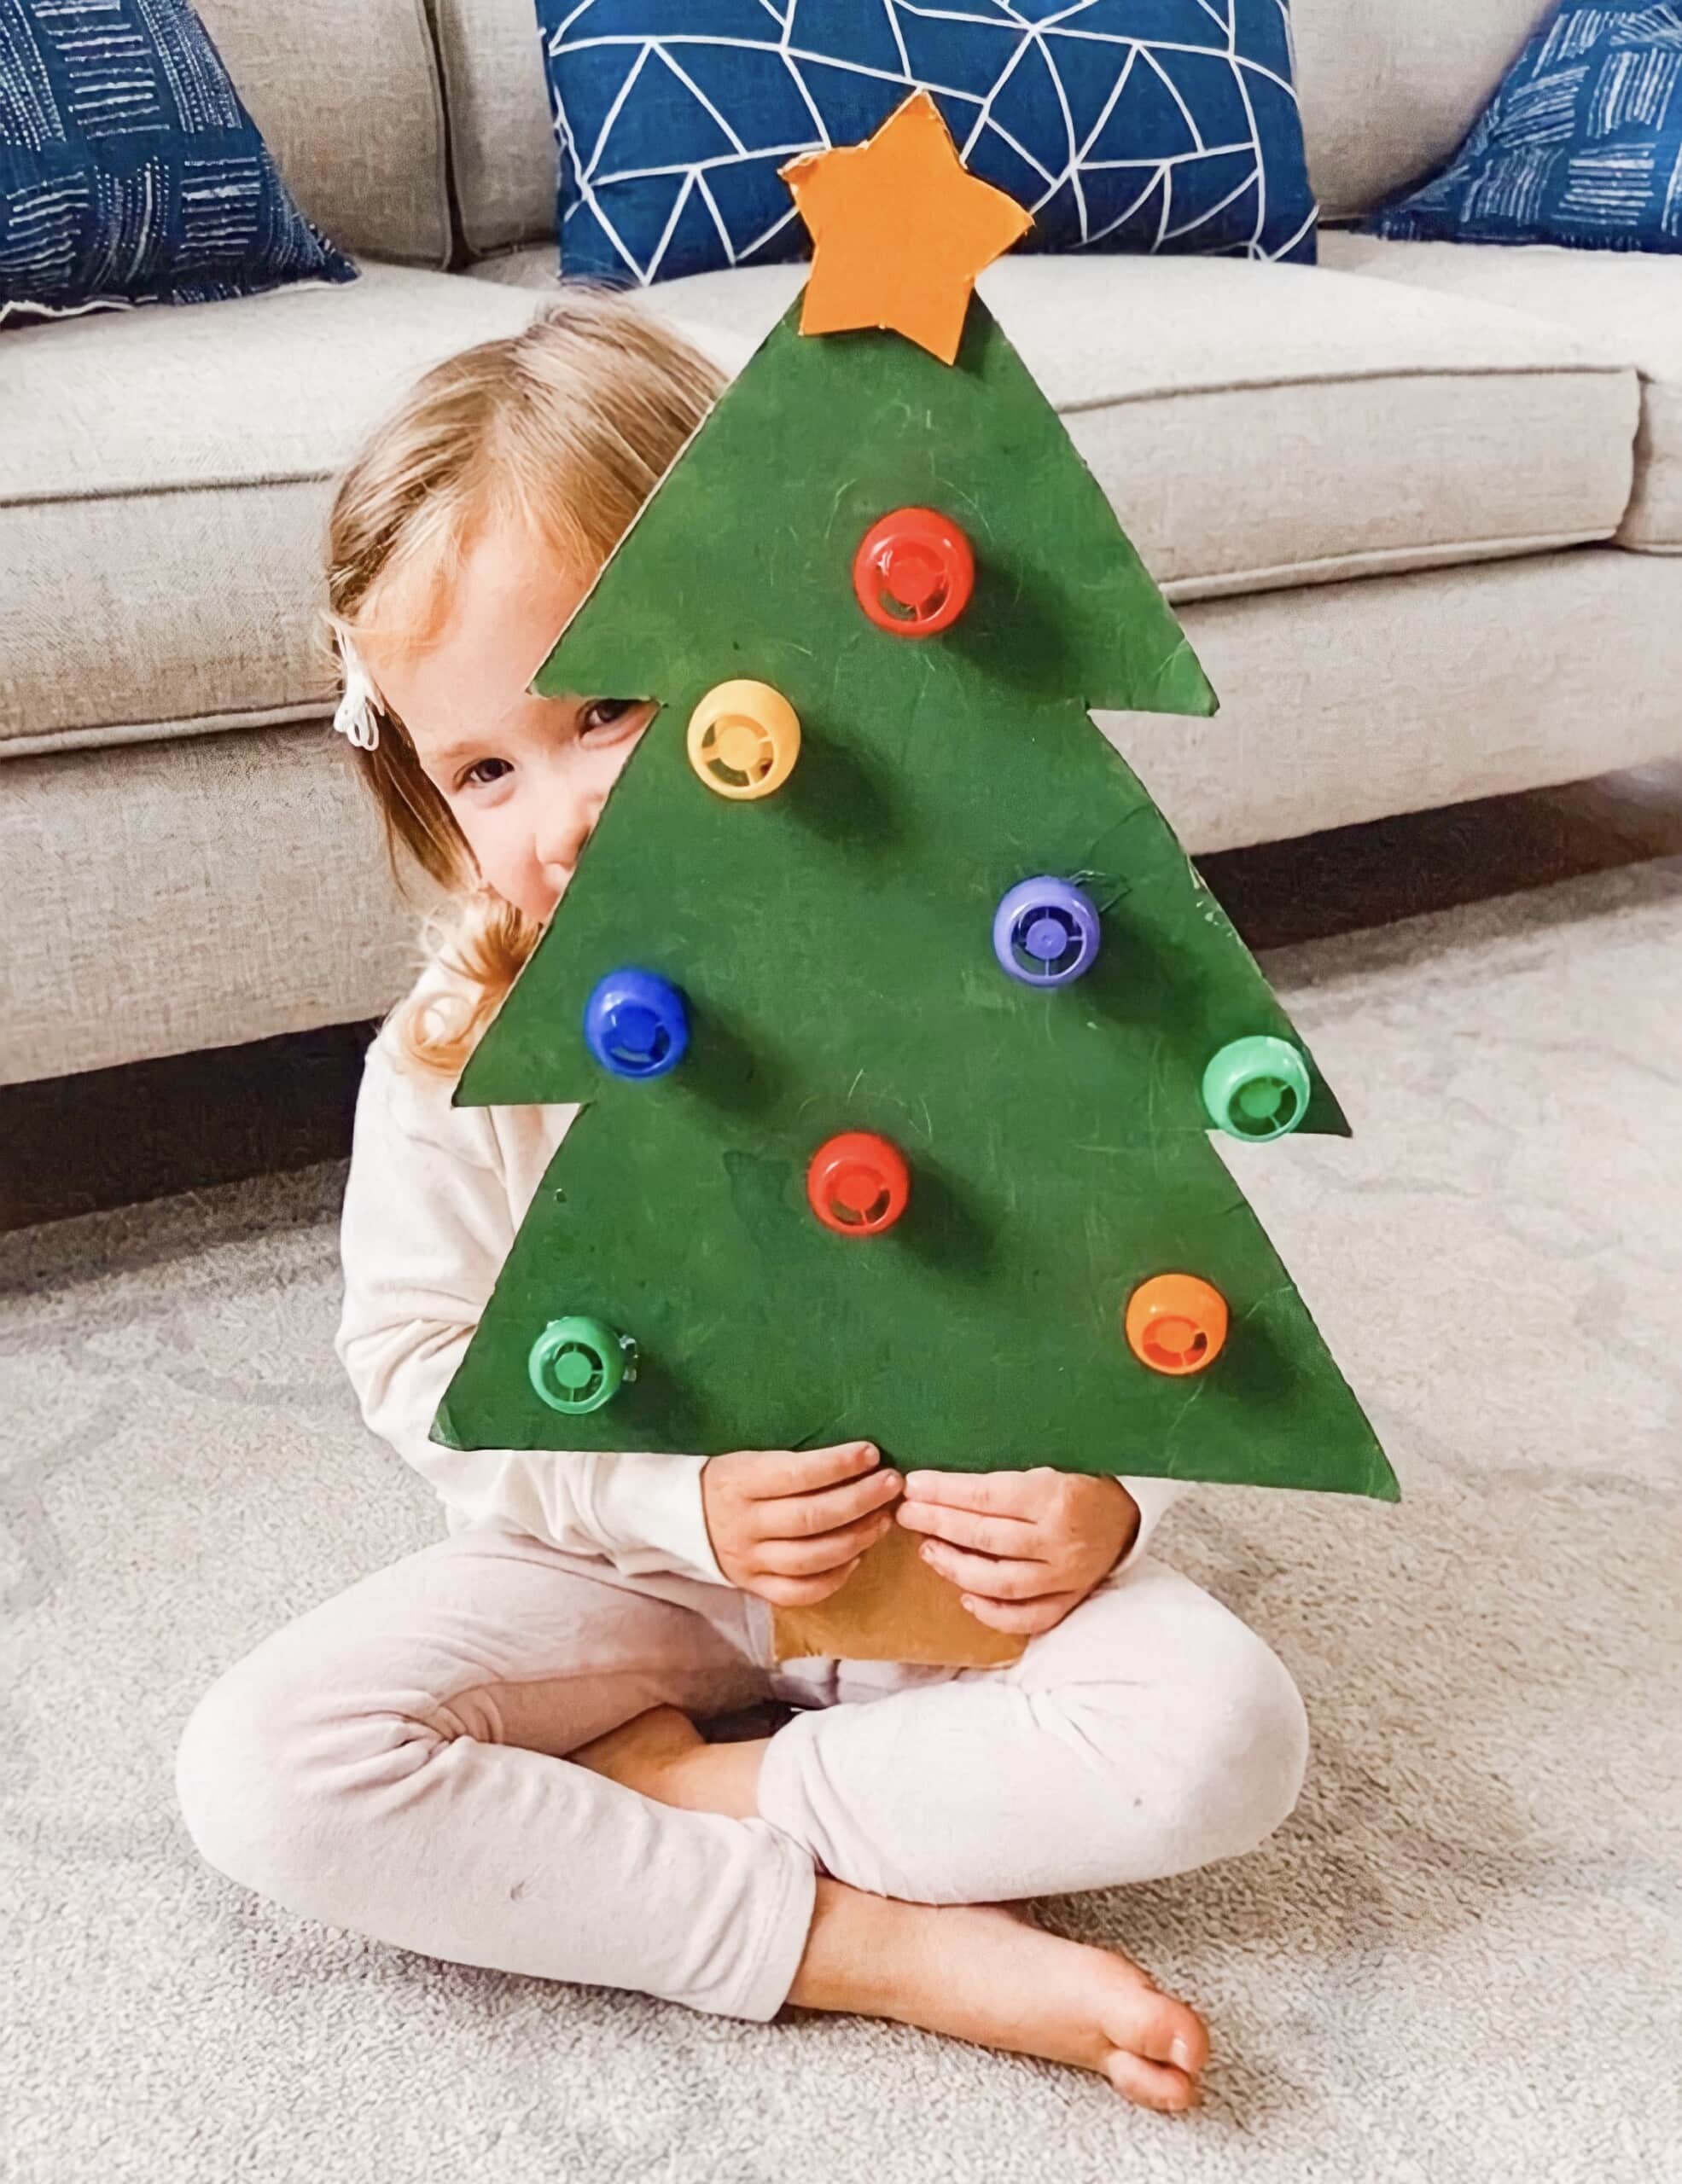 Pouch cap Christmas tree craft 